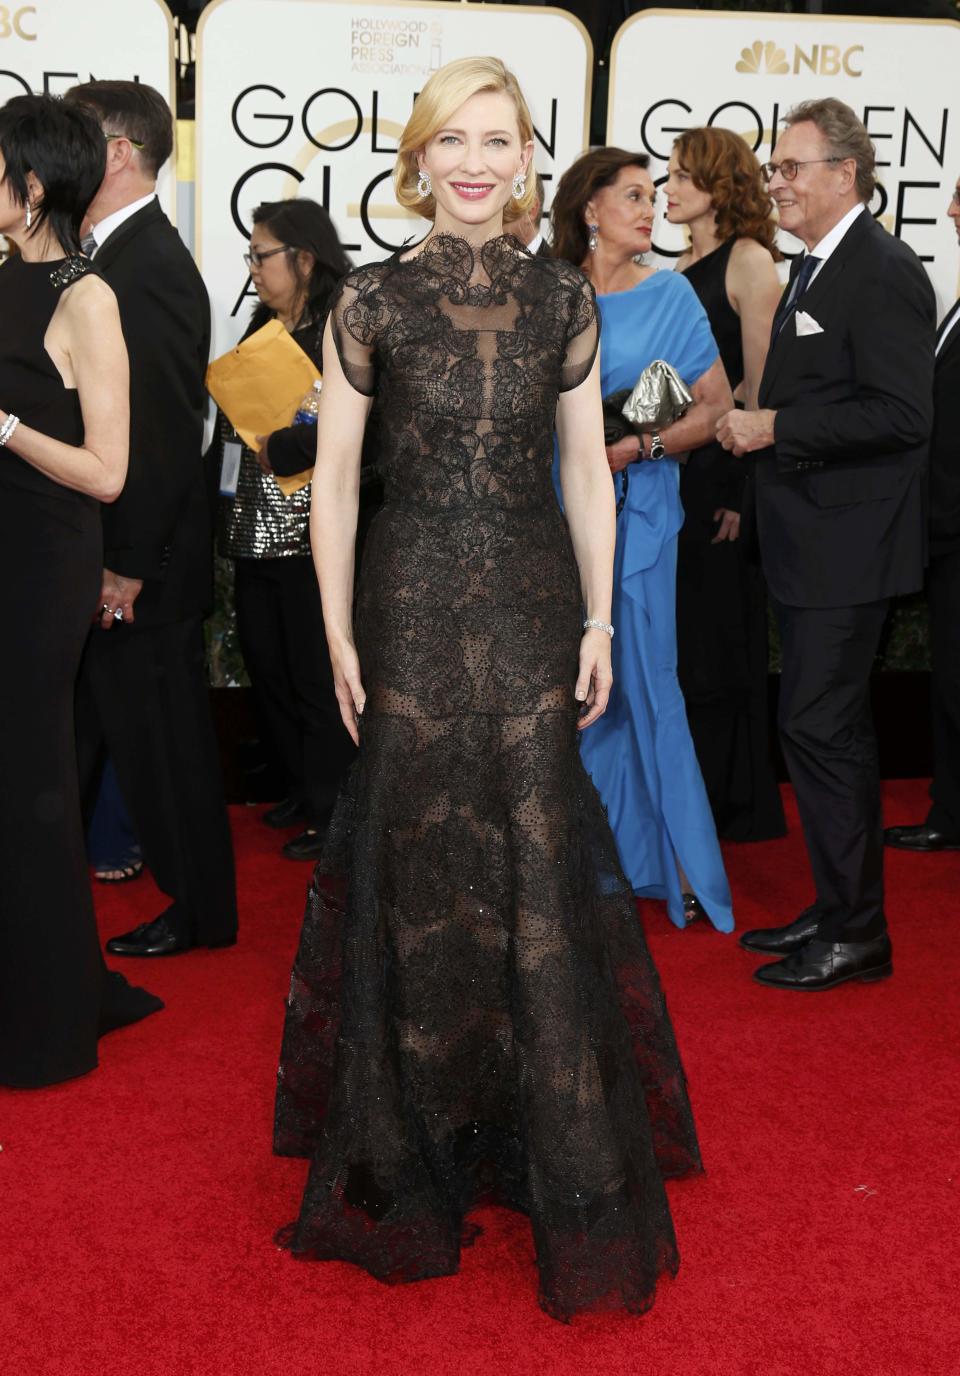 Actress Cate Blanchett from the film "Blue Jasmine" arrives at the 71st annual Golden Globe Awards in Beverly Hills